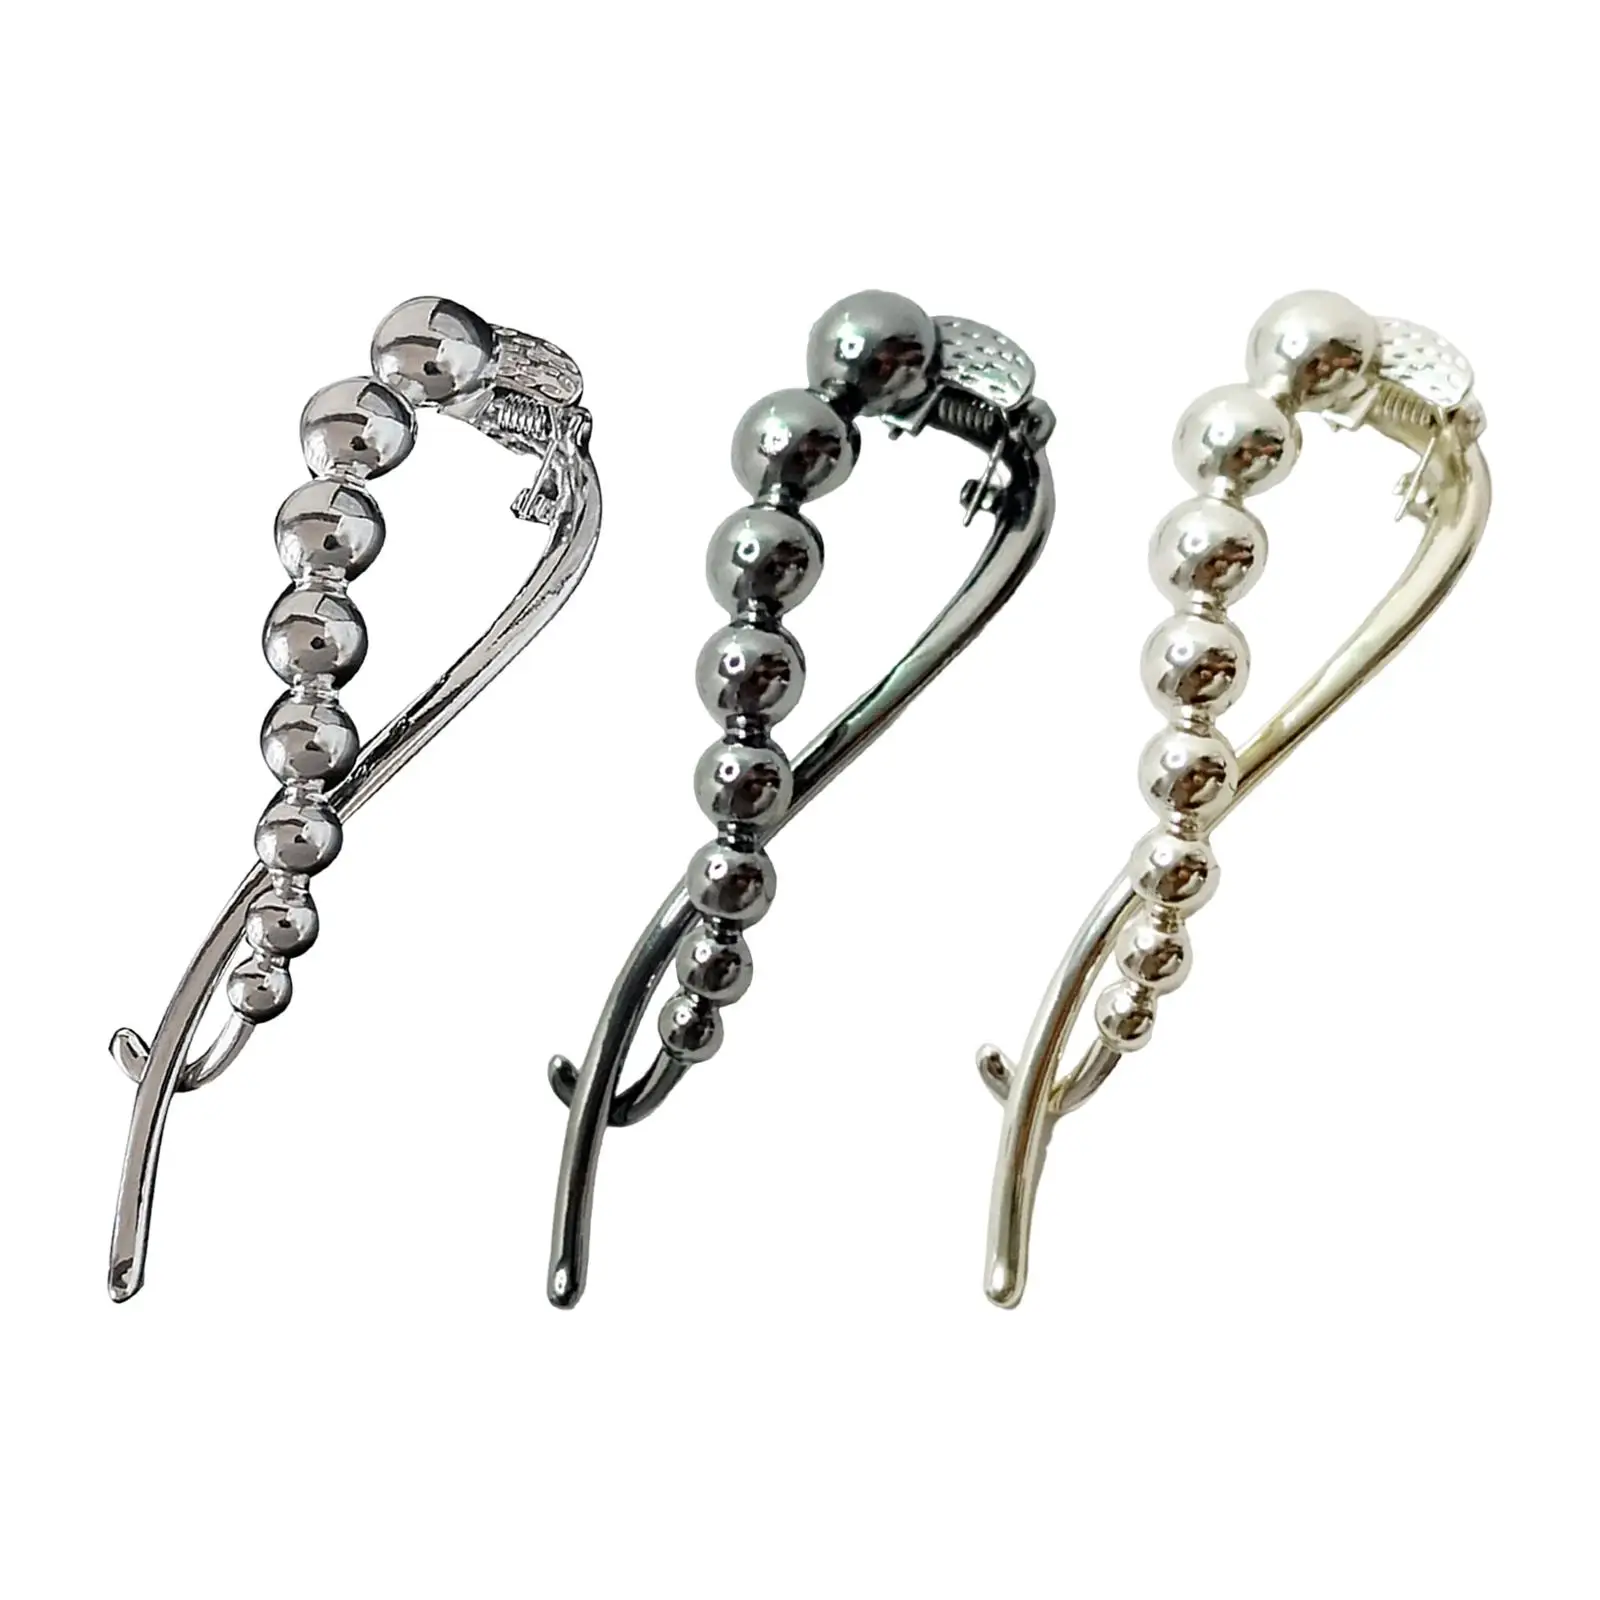 Hairpin Clip Non Slip Hair Styling Accessories Metal Ponytail Holder Hair Barrettes for Long Hair Ceremony Girls Women Birthday